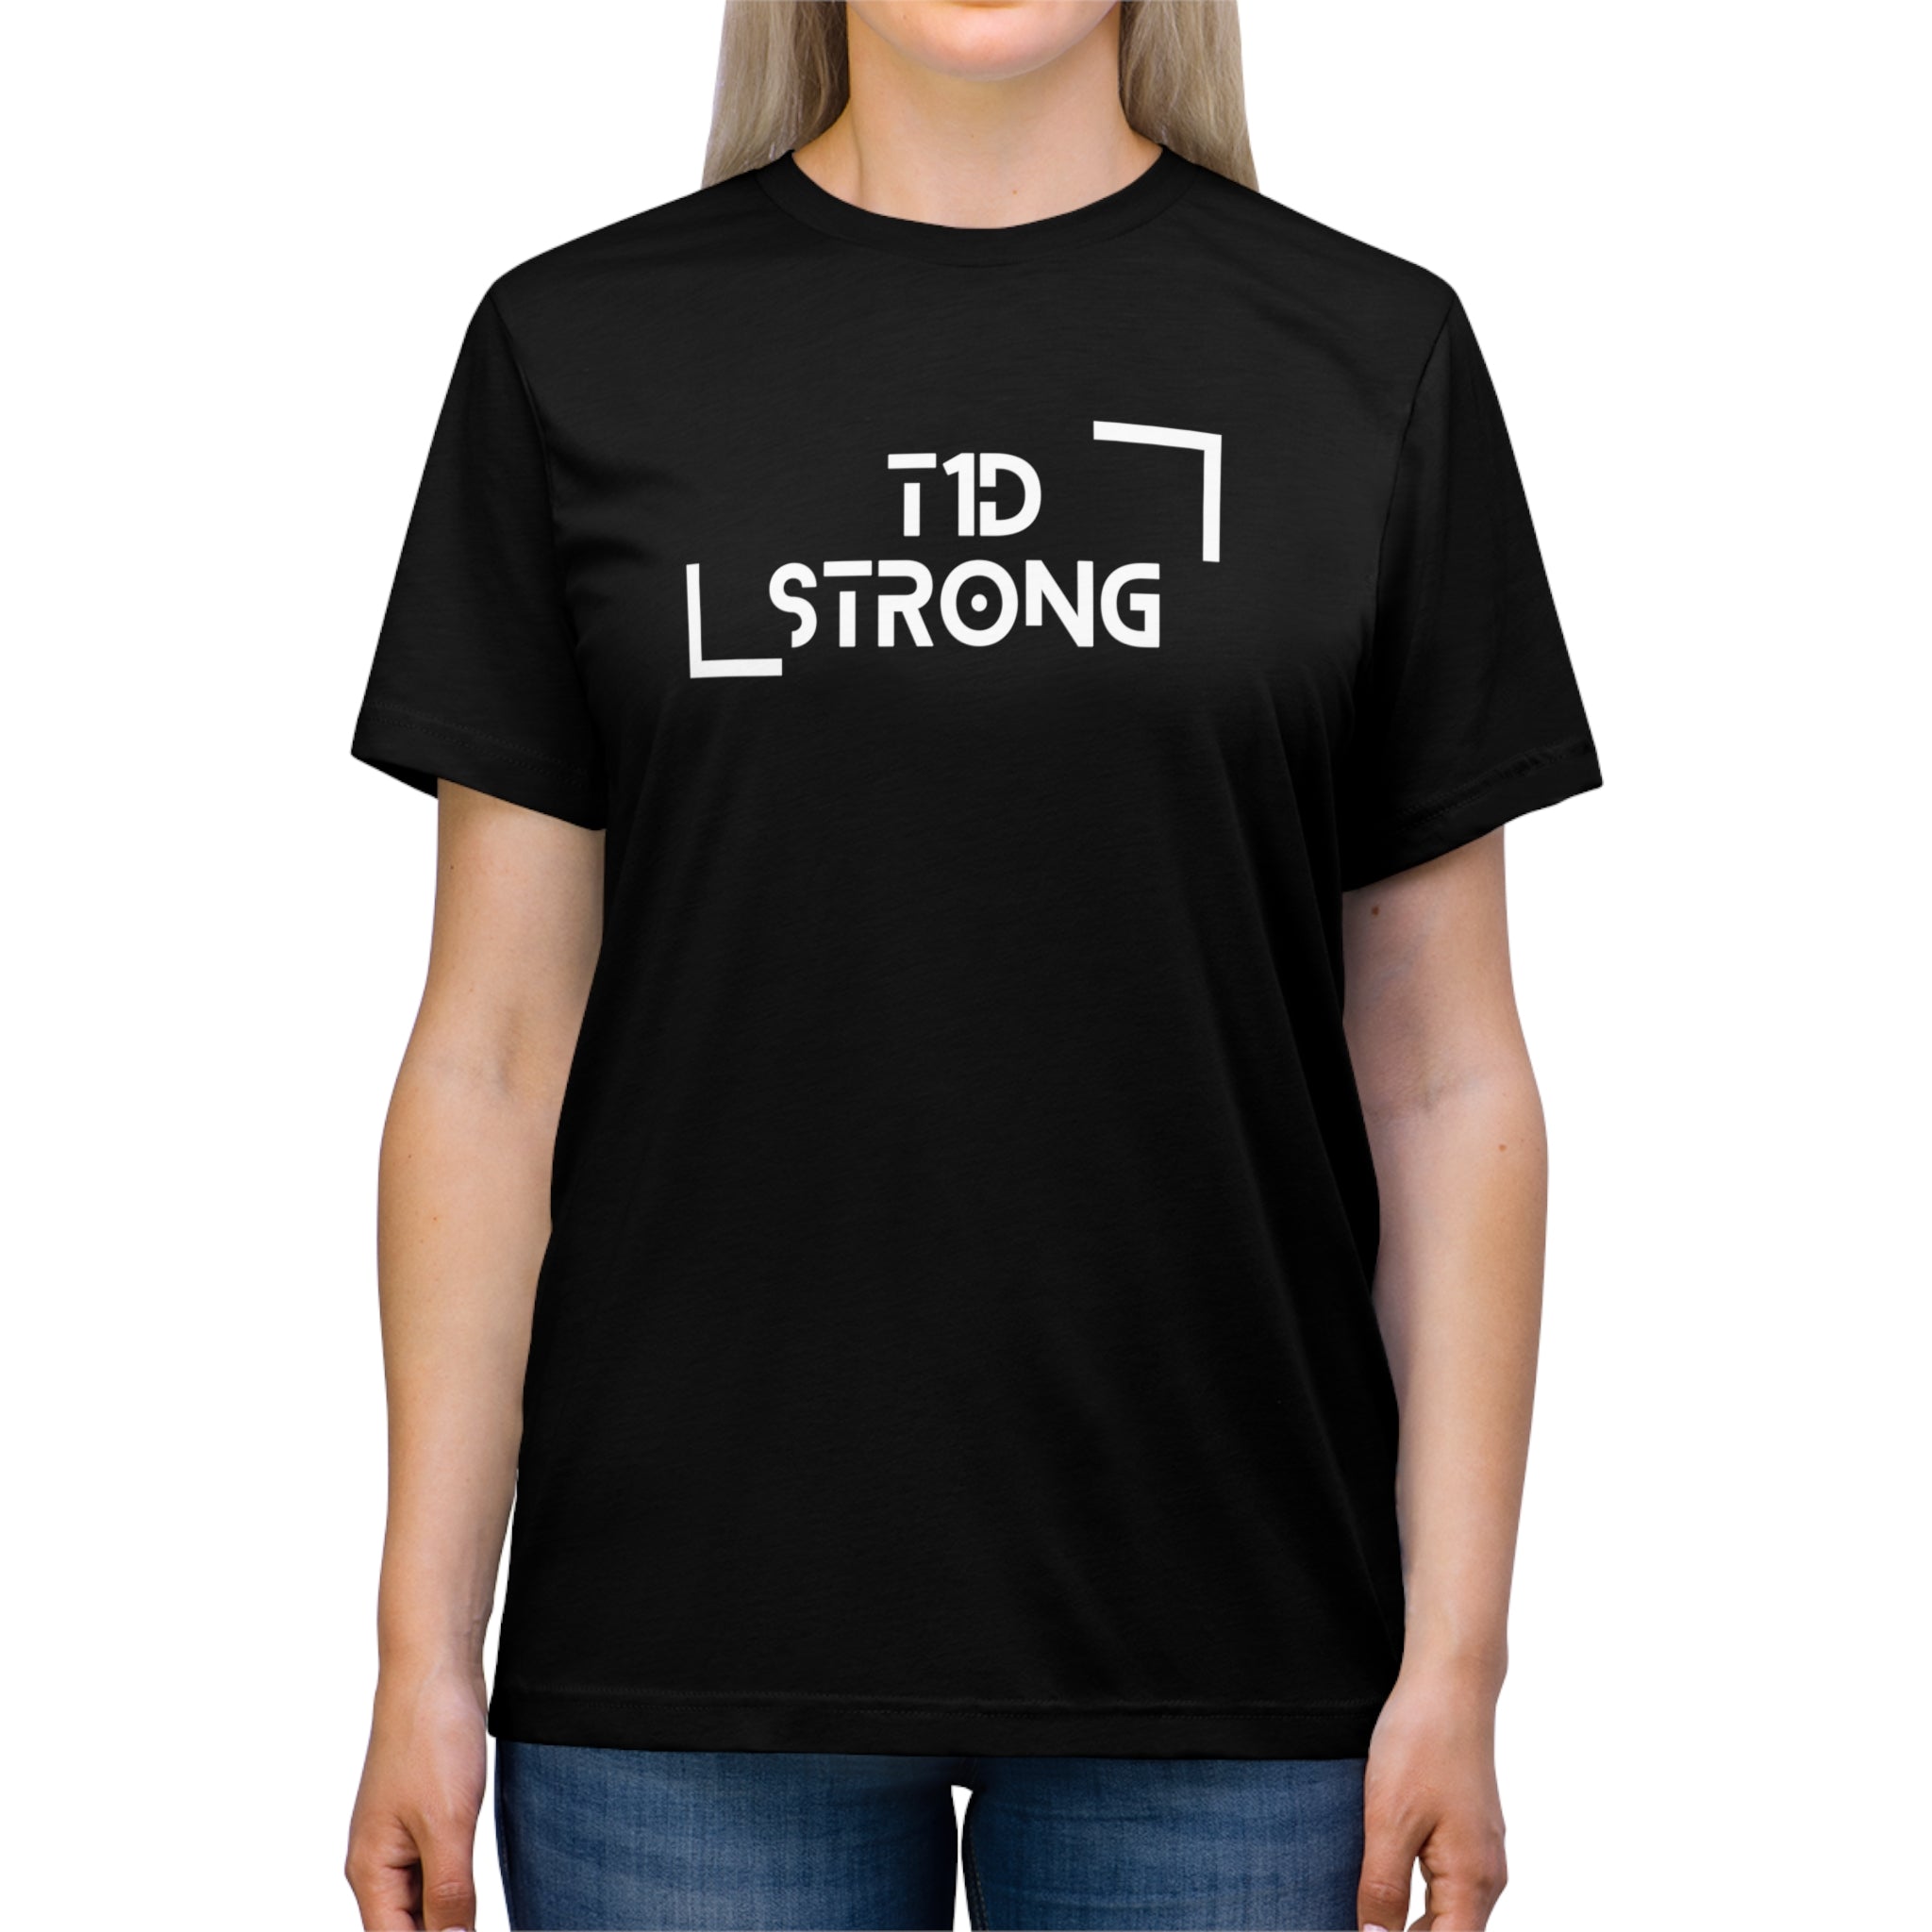 Adult Unisex Super Soft T1D Strong Short Sleeve Graphic Tee